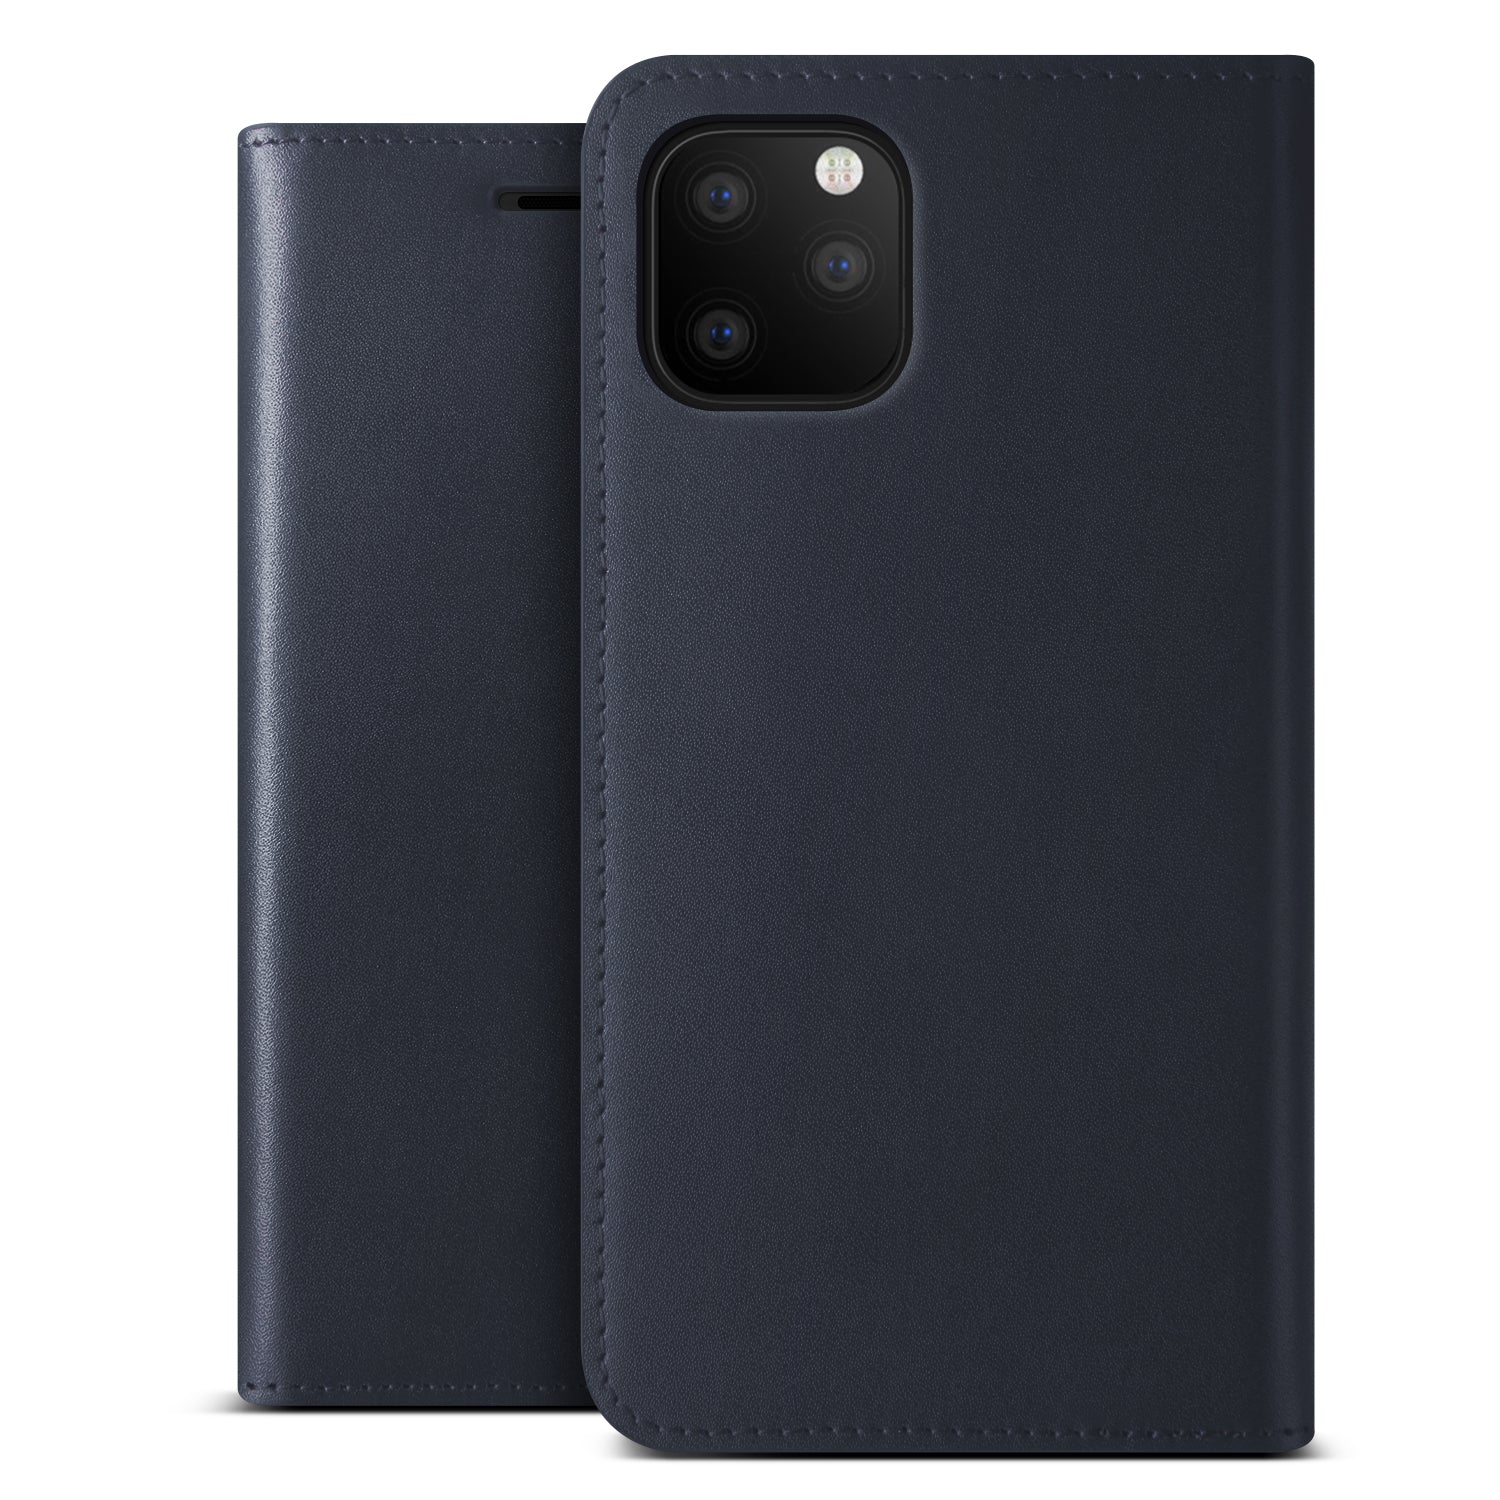 iPhone 11 Pro Case Genuine Leather Diary space for up to three (3) cards and extra cash. Keep your device secure in a hard frame with Premium Leather. Enjoy the smart, and convenient way to keep your valuables secured all in one hand.